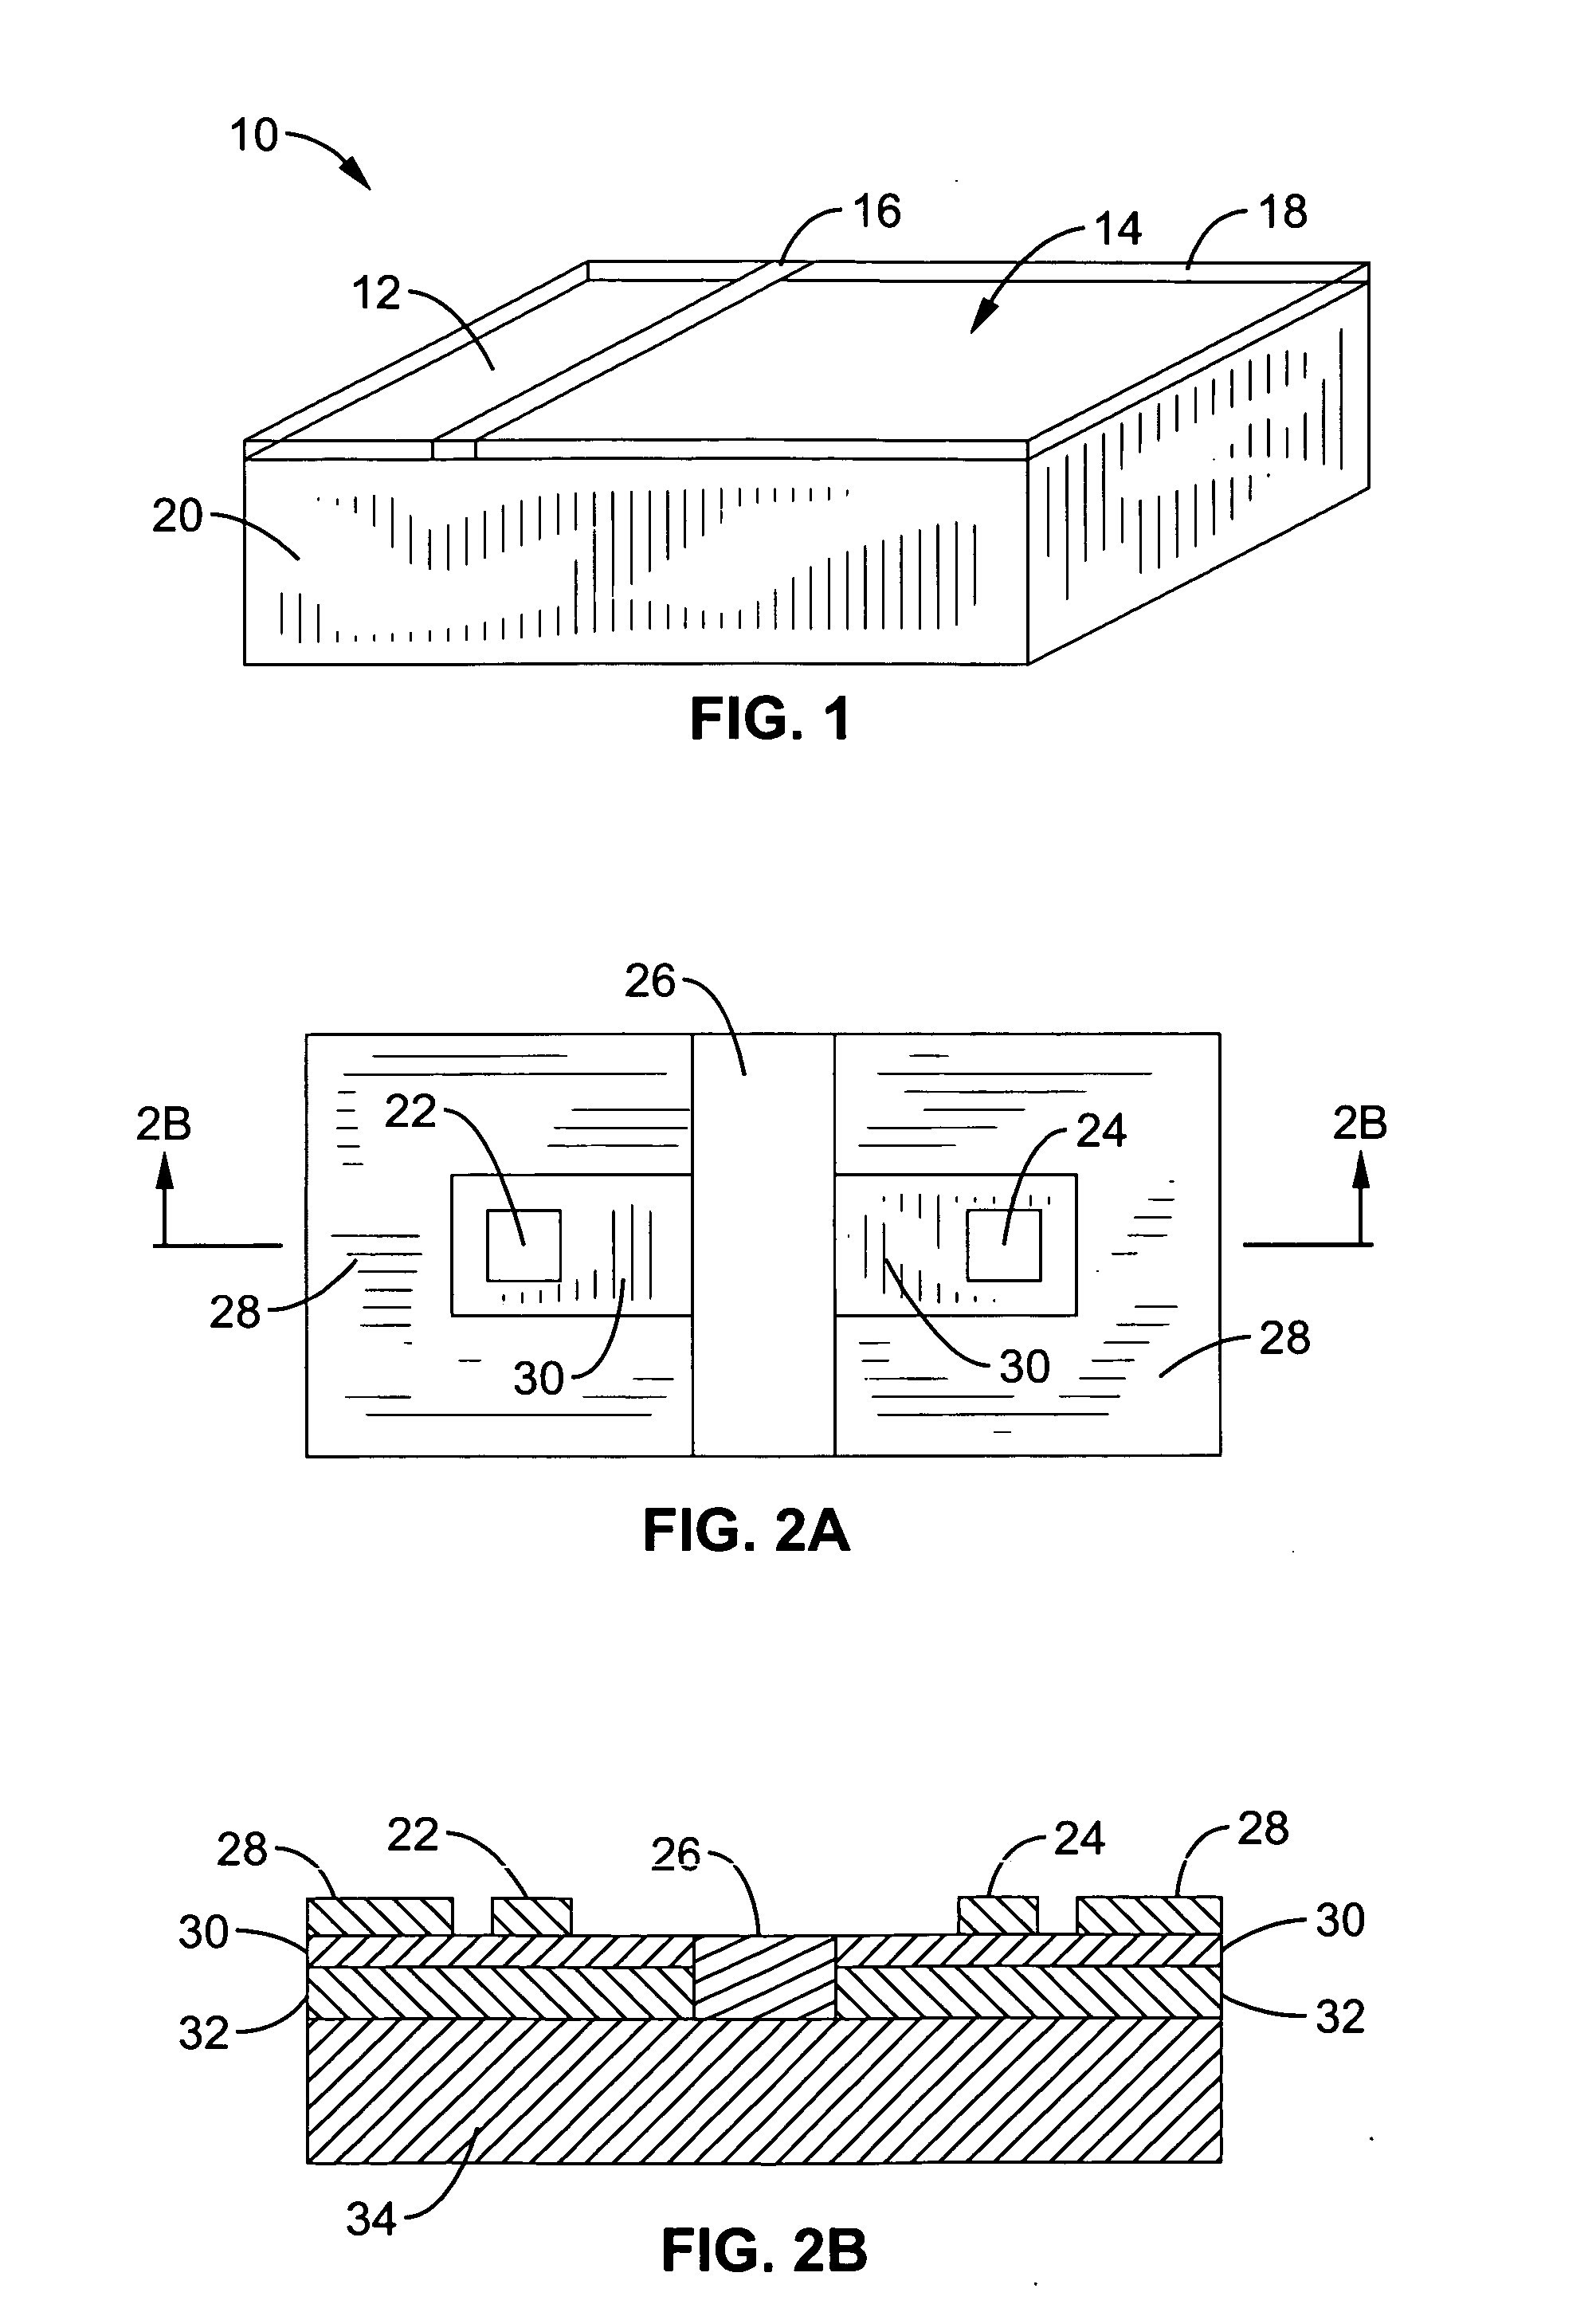 Low crosstalk substrate for mixed-signal integrated circuits